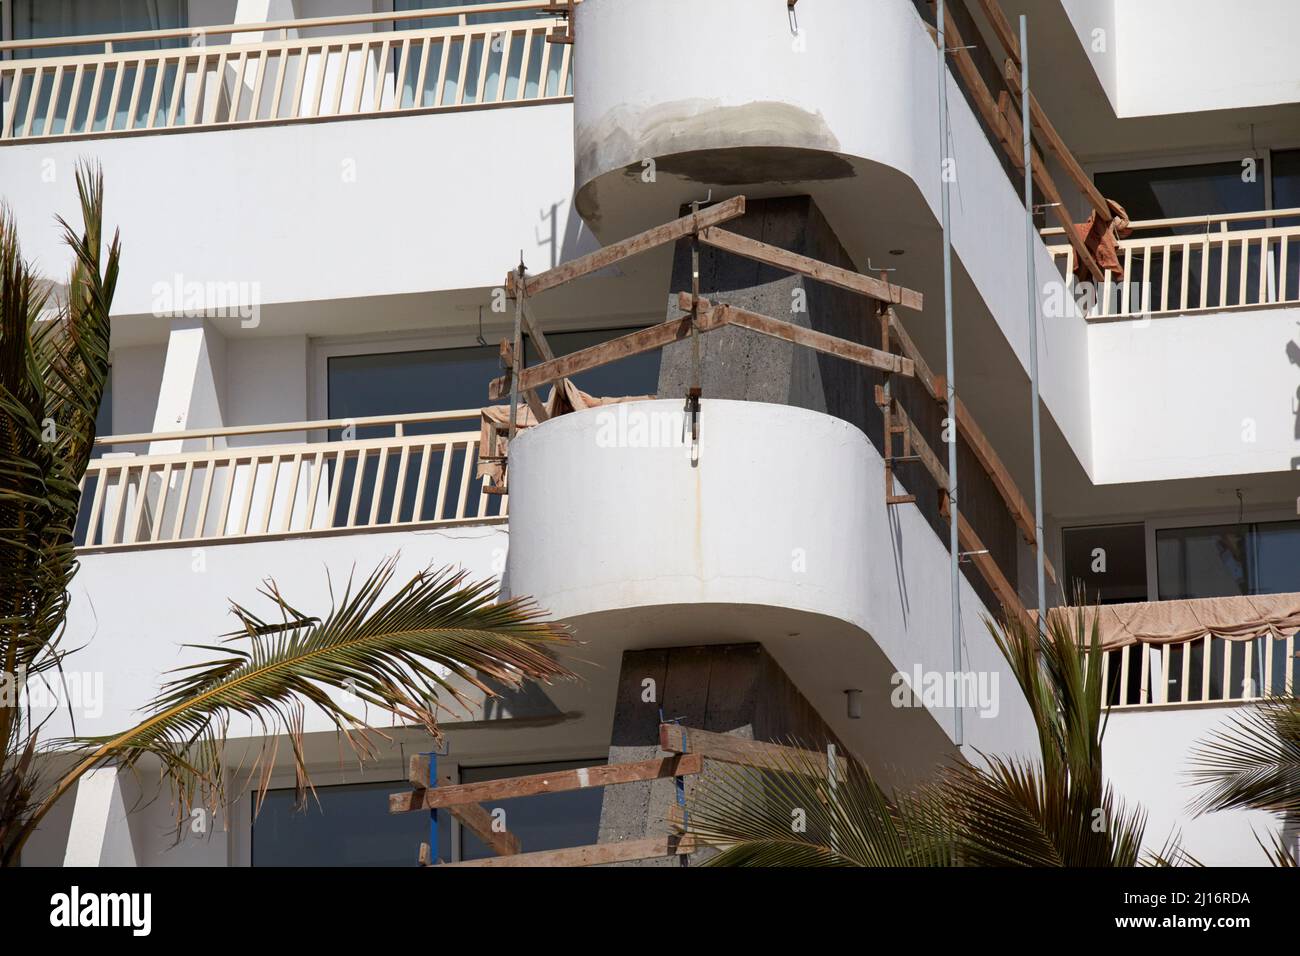 ongoing repairs to hotel accommodation balconies in puerto del carmen lanzarote canary islands spain Stock Photo